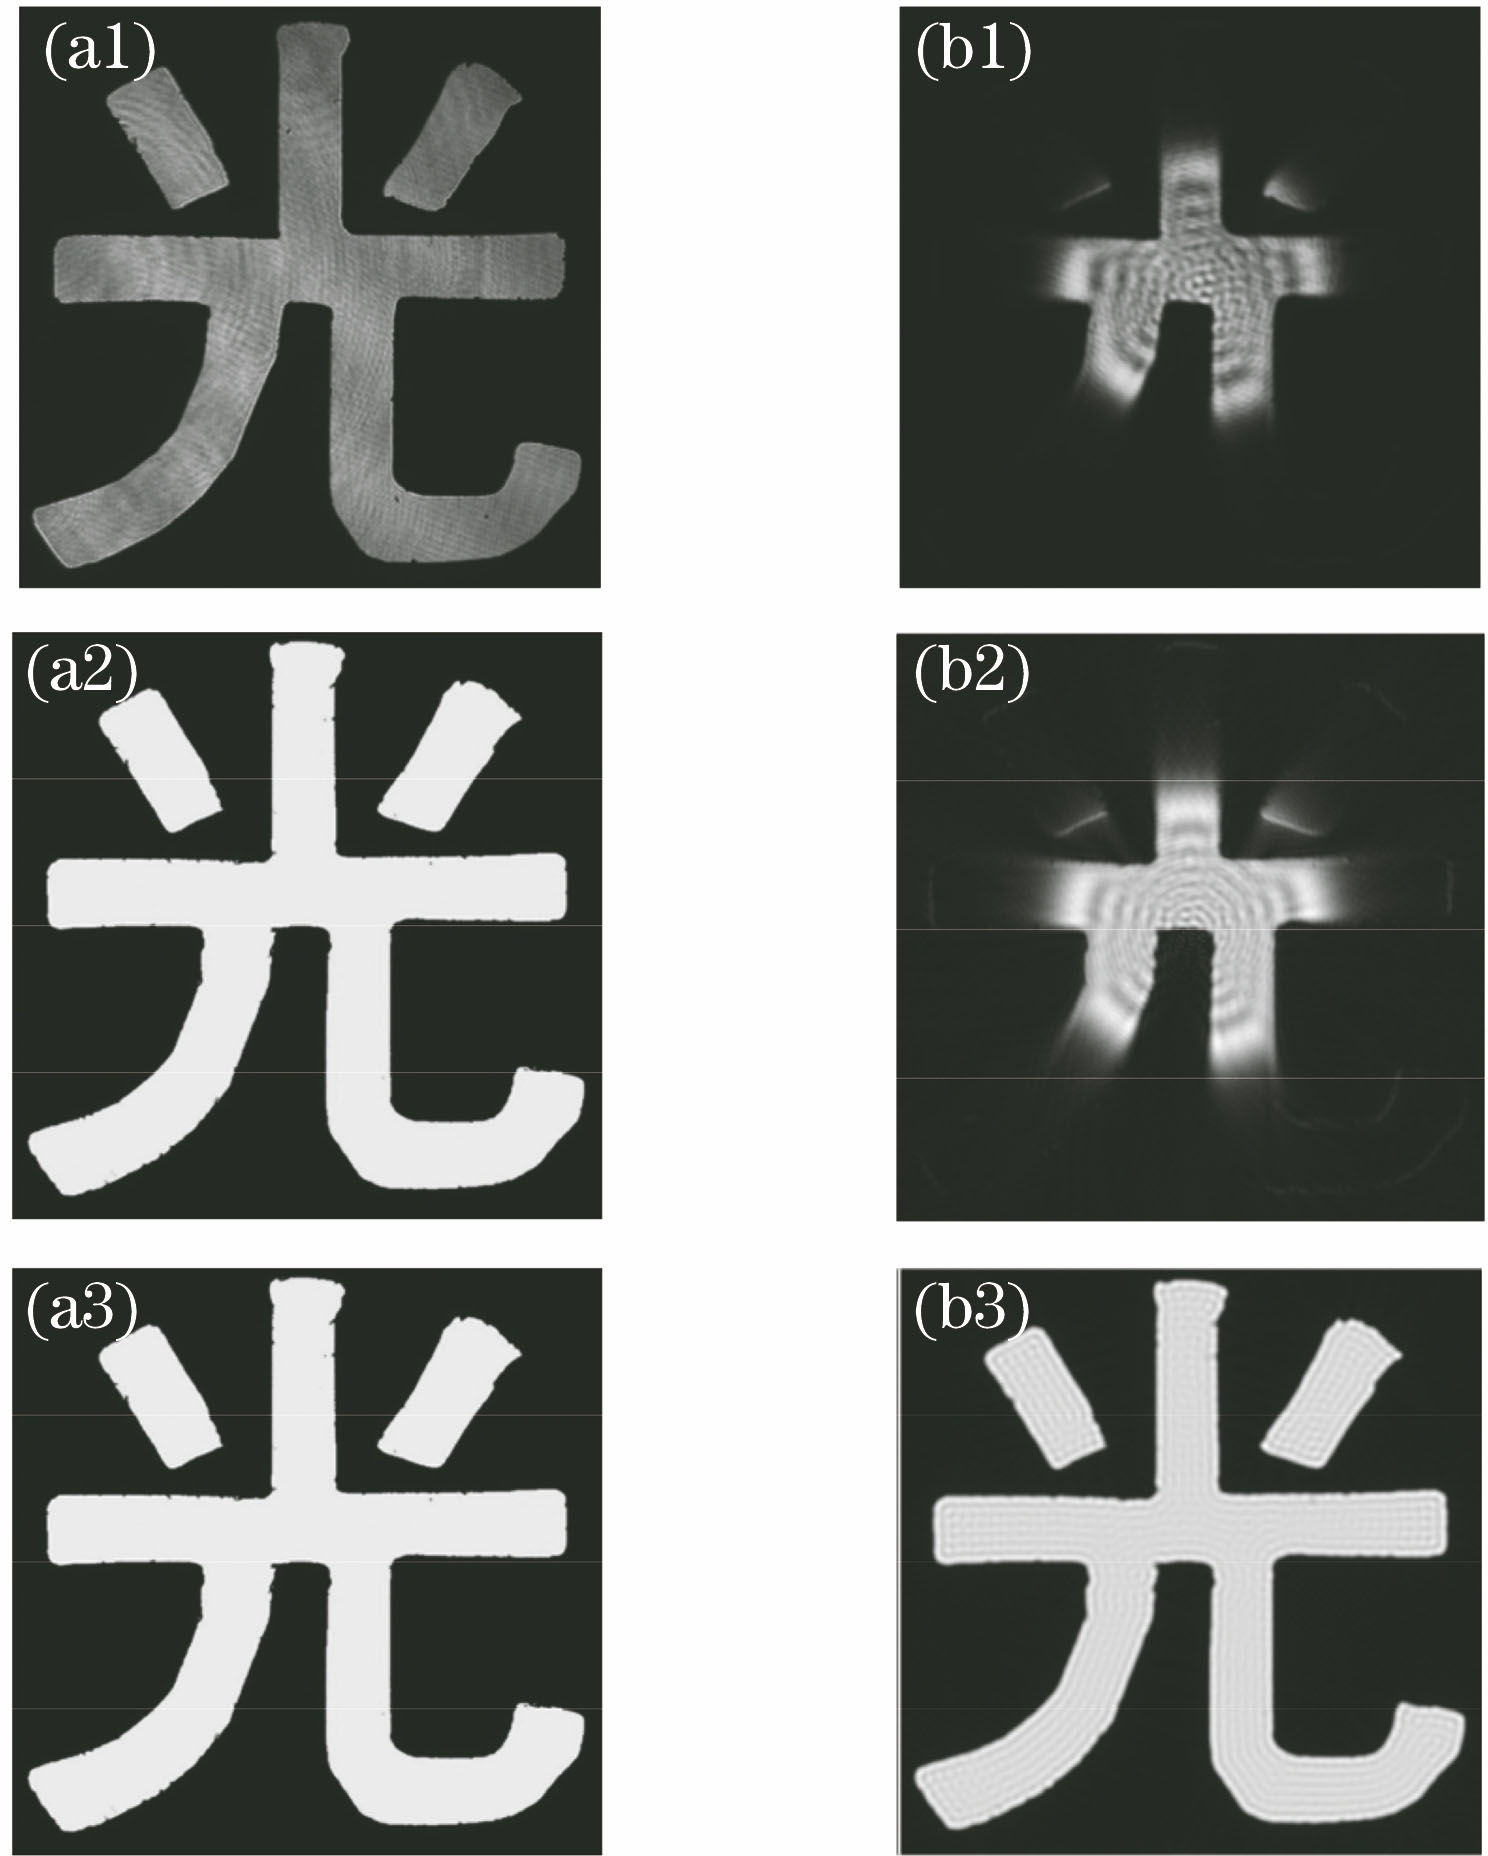 Experimental measurement and theoretical simulation results of intensity image (image plane size is 5.3 mm×5.3 mm). (a1) Experimental measurement without the aperture; (b1) experimental measurement with the aperture; (a2)(b2) simulation result of Eq.(2); (a3)(b3) simulation result of Eq.(3)